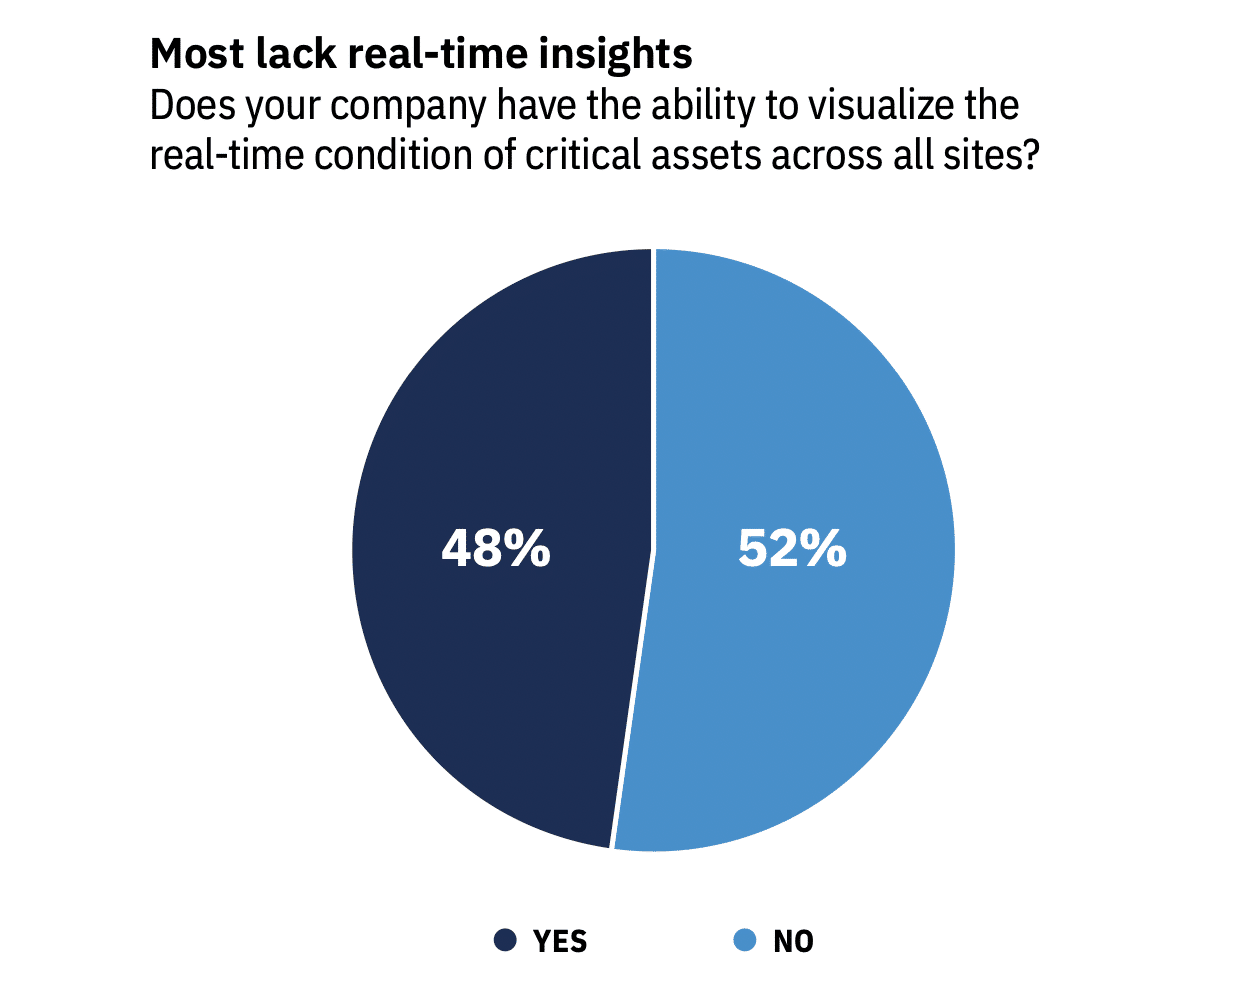 A pie chart illustrating the lack of real-time insights among the majority.